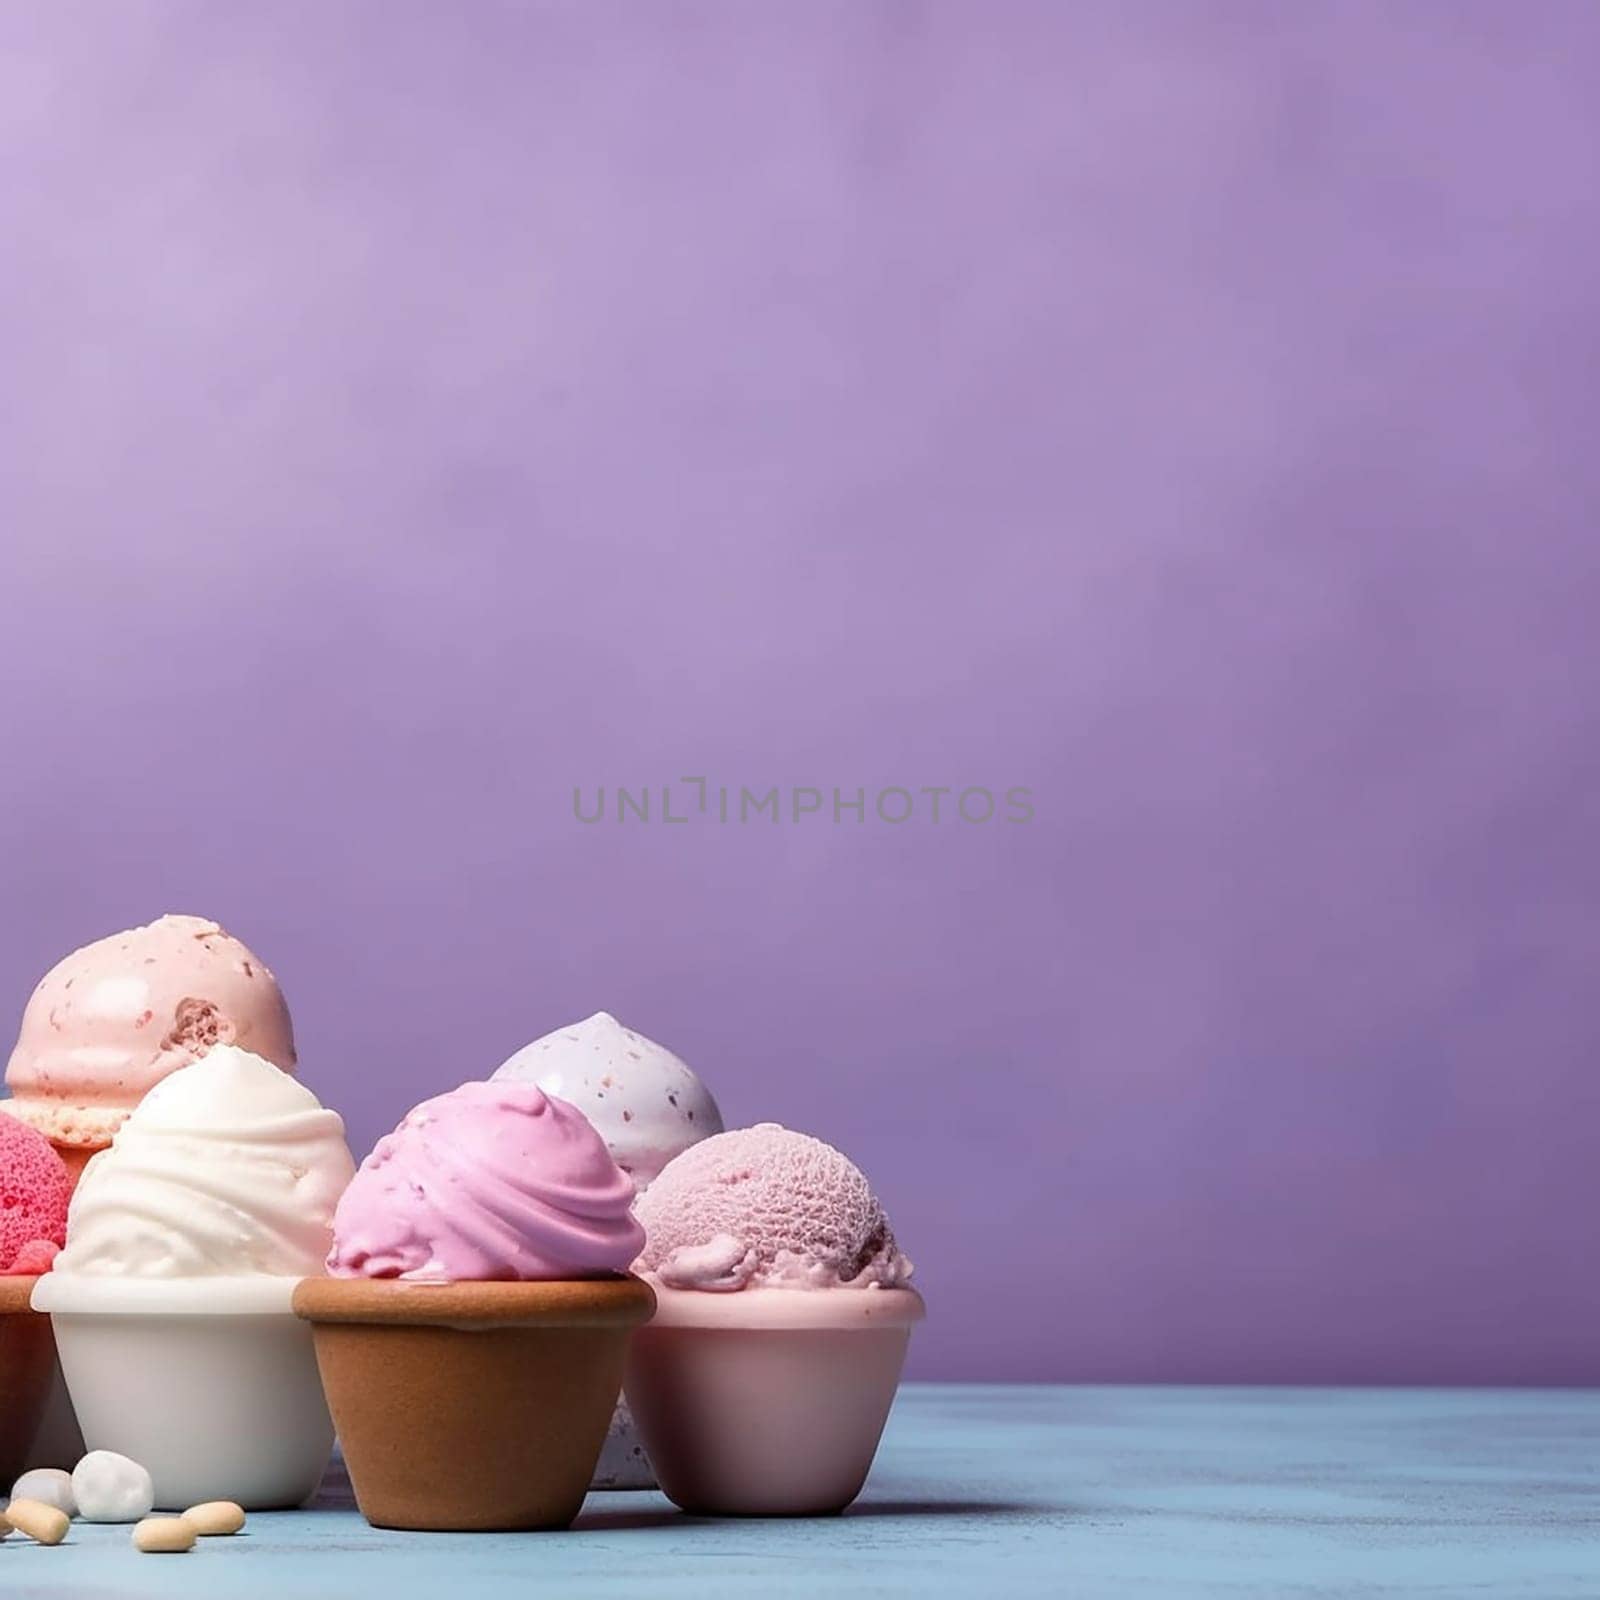 Assorted ice cream scoops in cups against a purple backdrop.